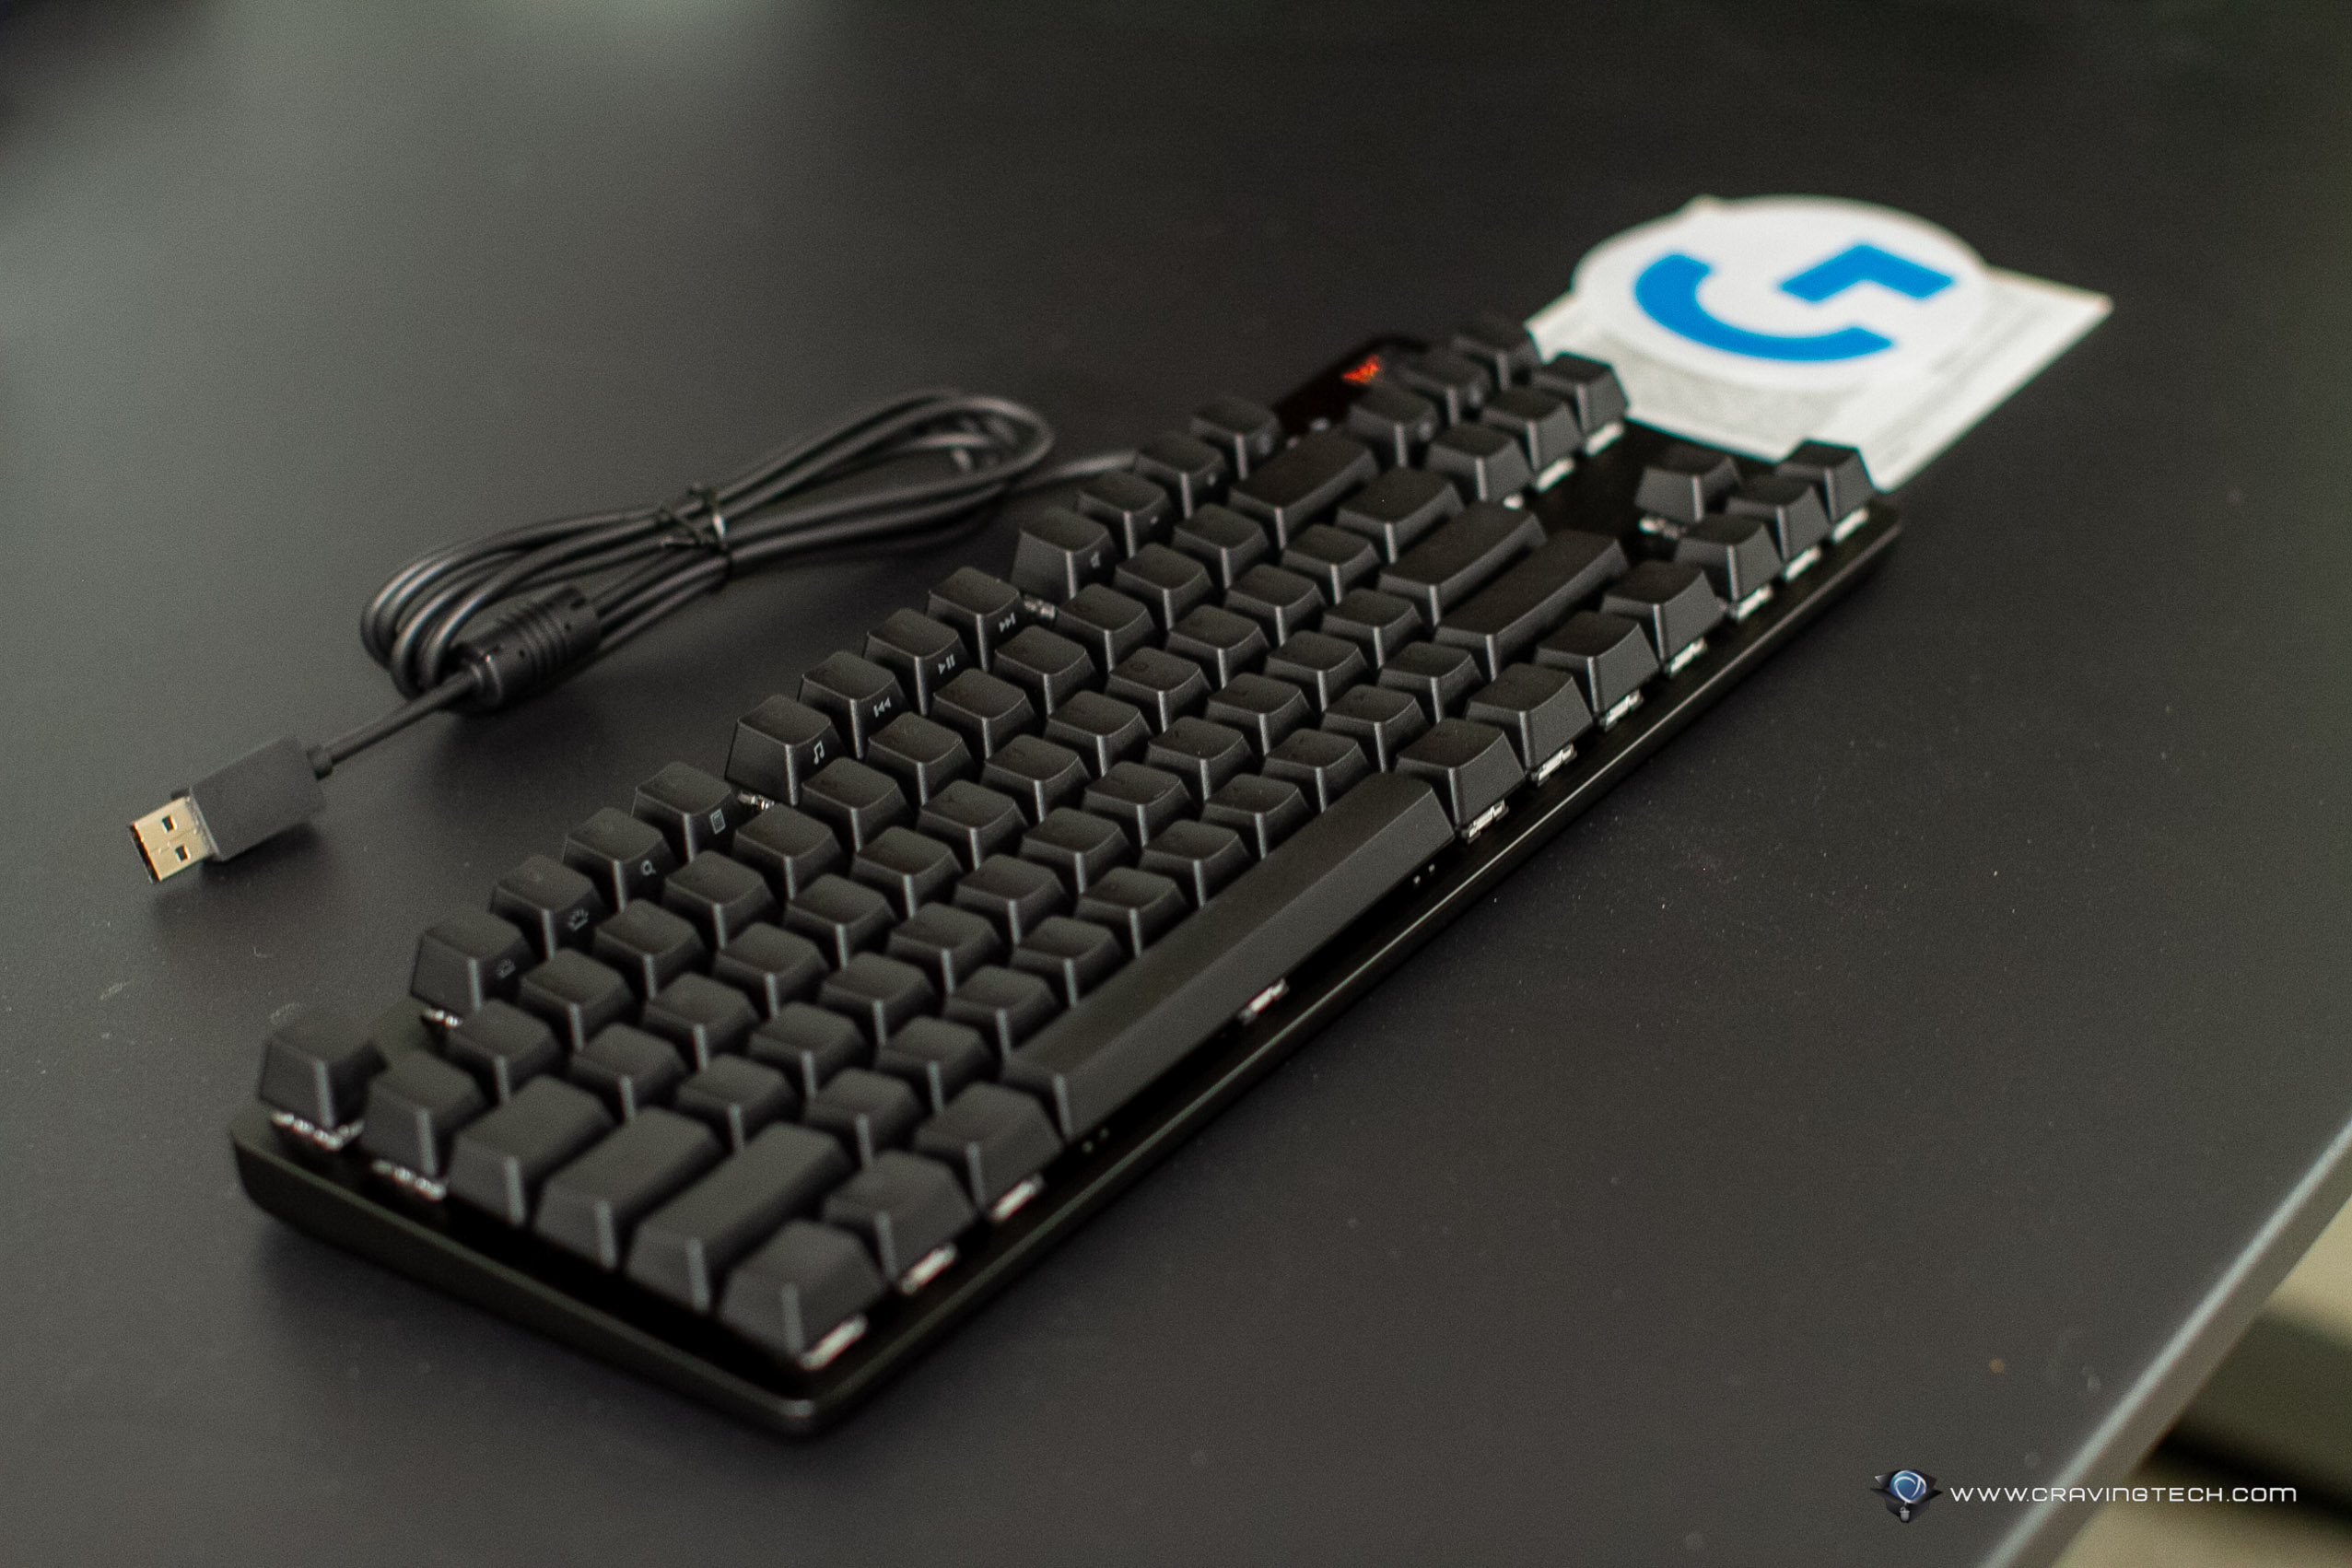 A budget, mechanical gaming keyboard from Logitech G - G413 TKL SE Review